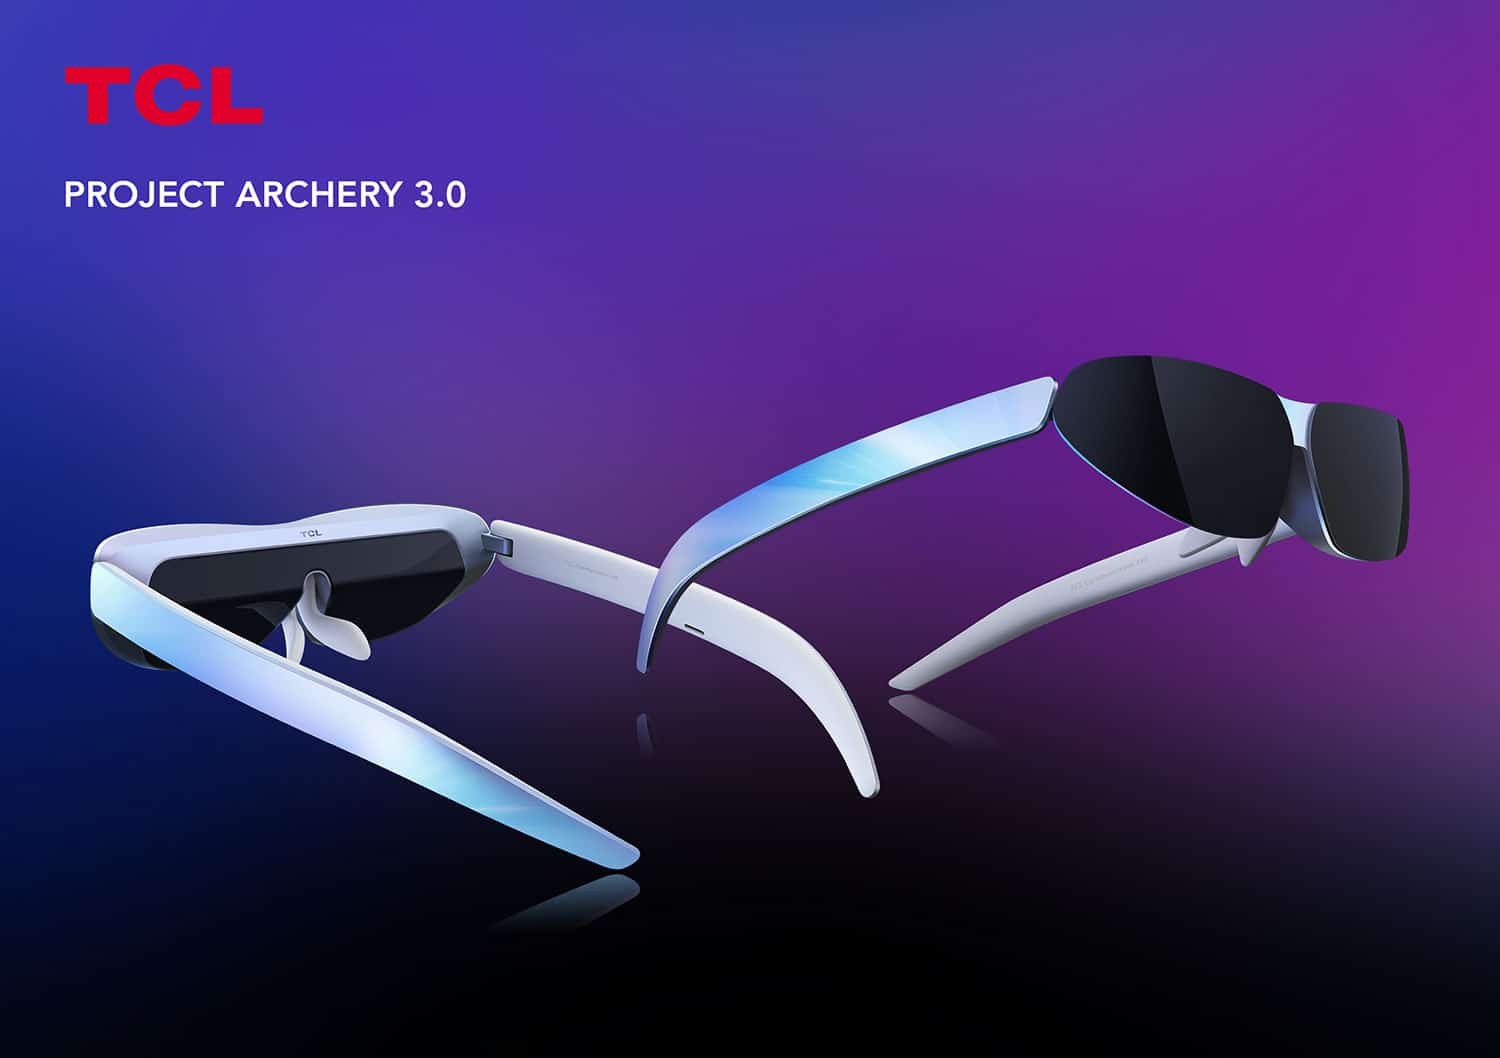 TCL showed off version 3.0 of its Project Archery wearable